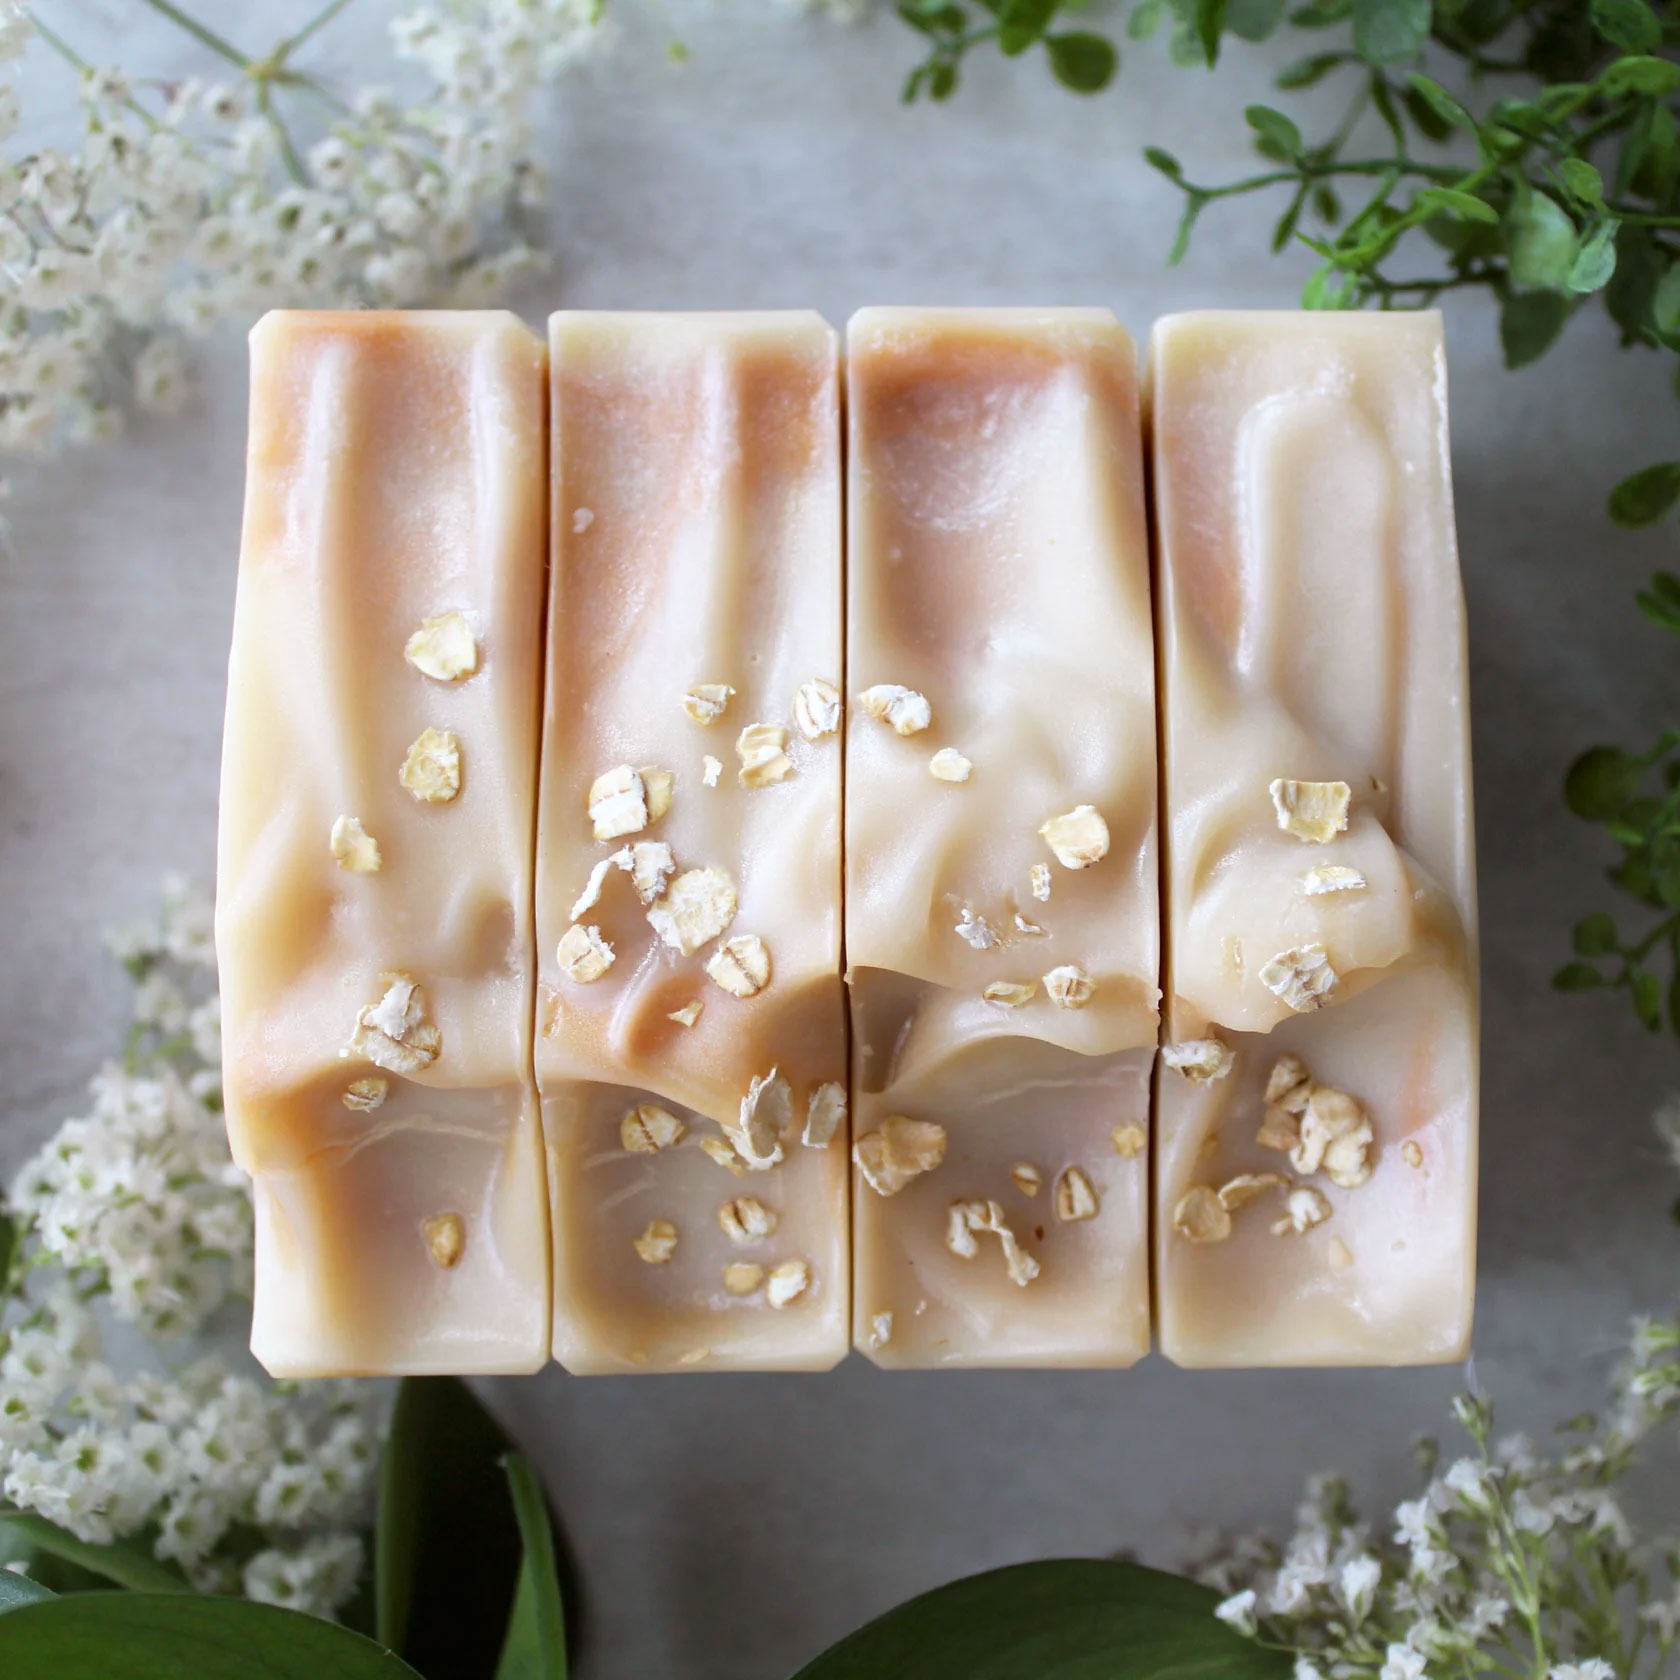 Smithmade essentials palm oil free oat bar of soap